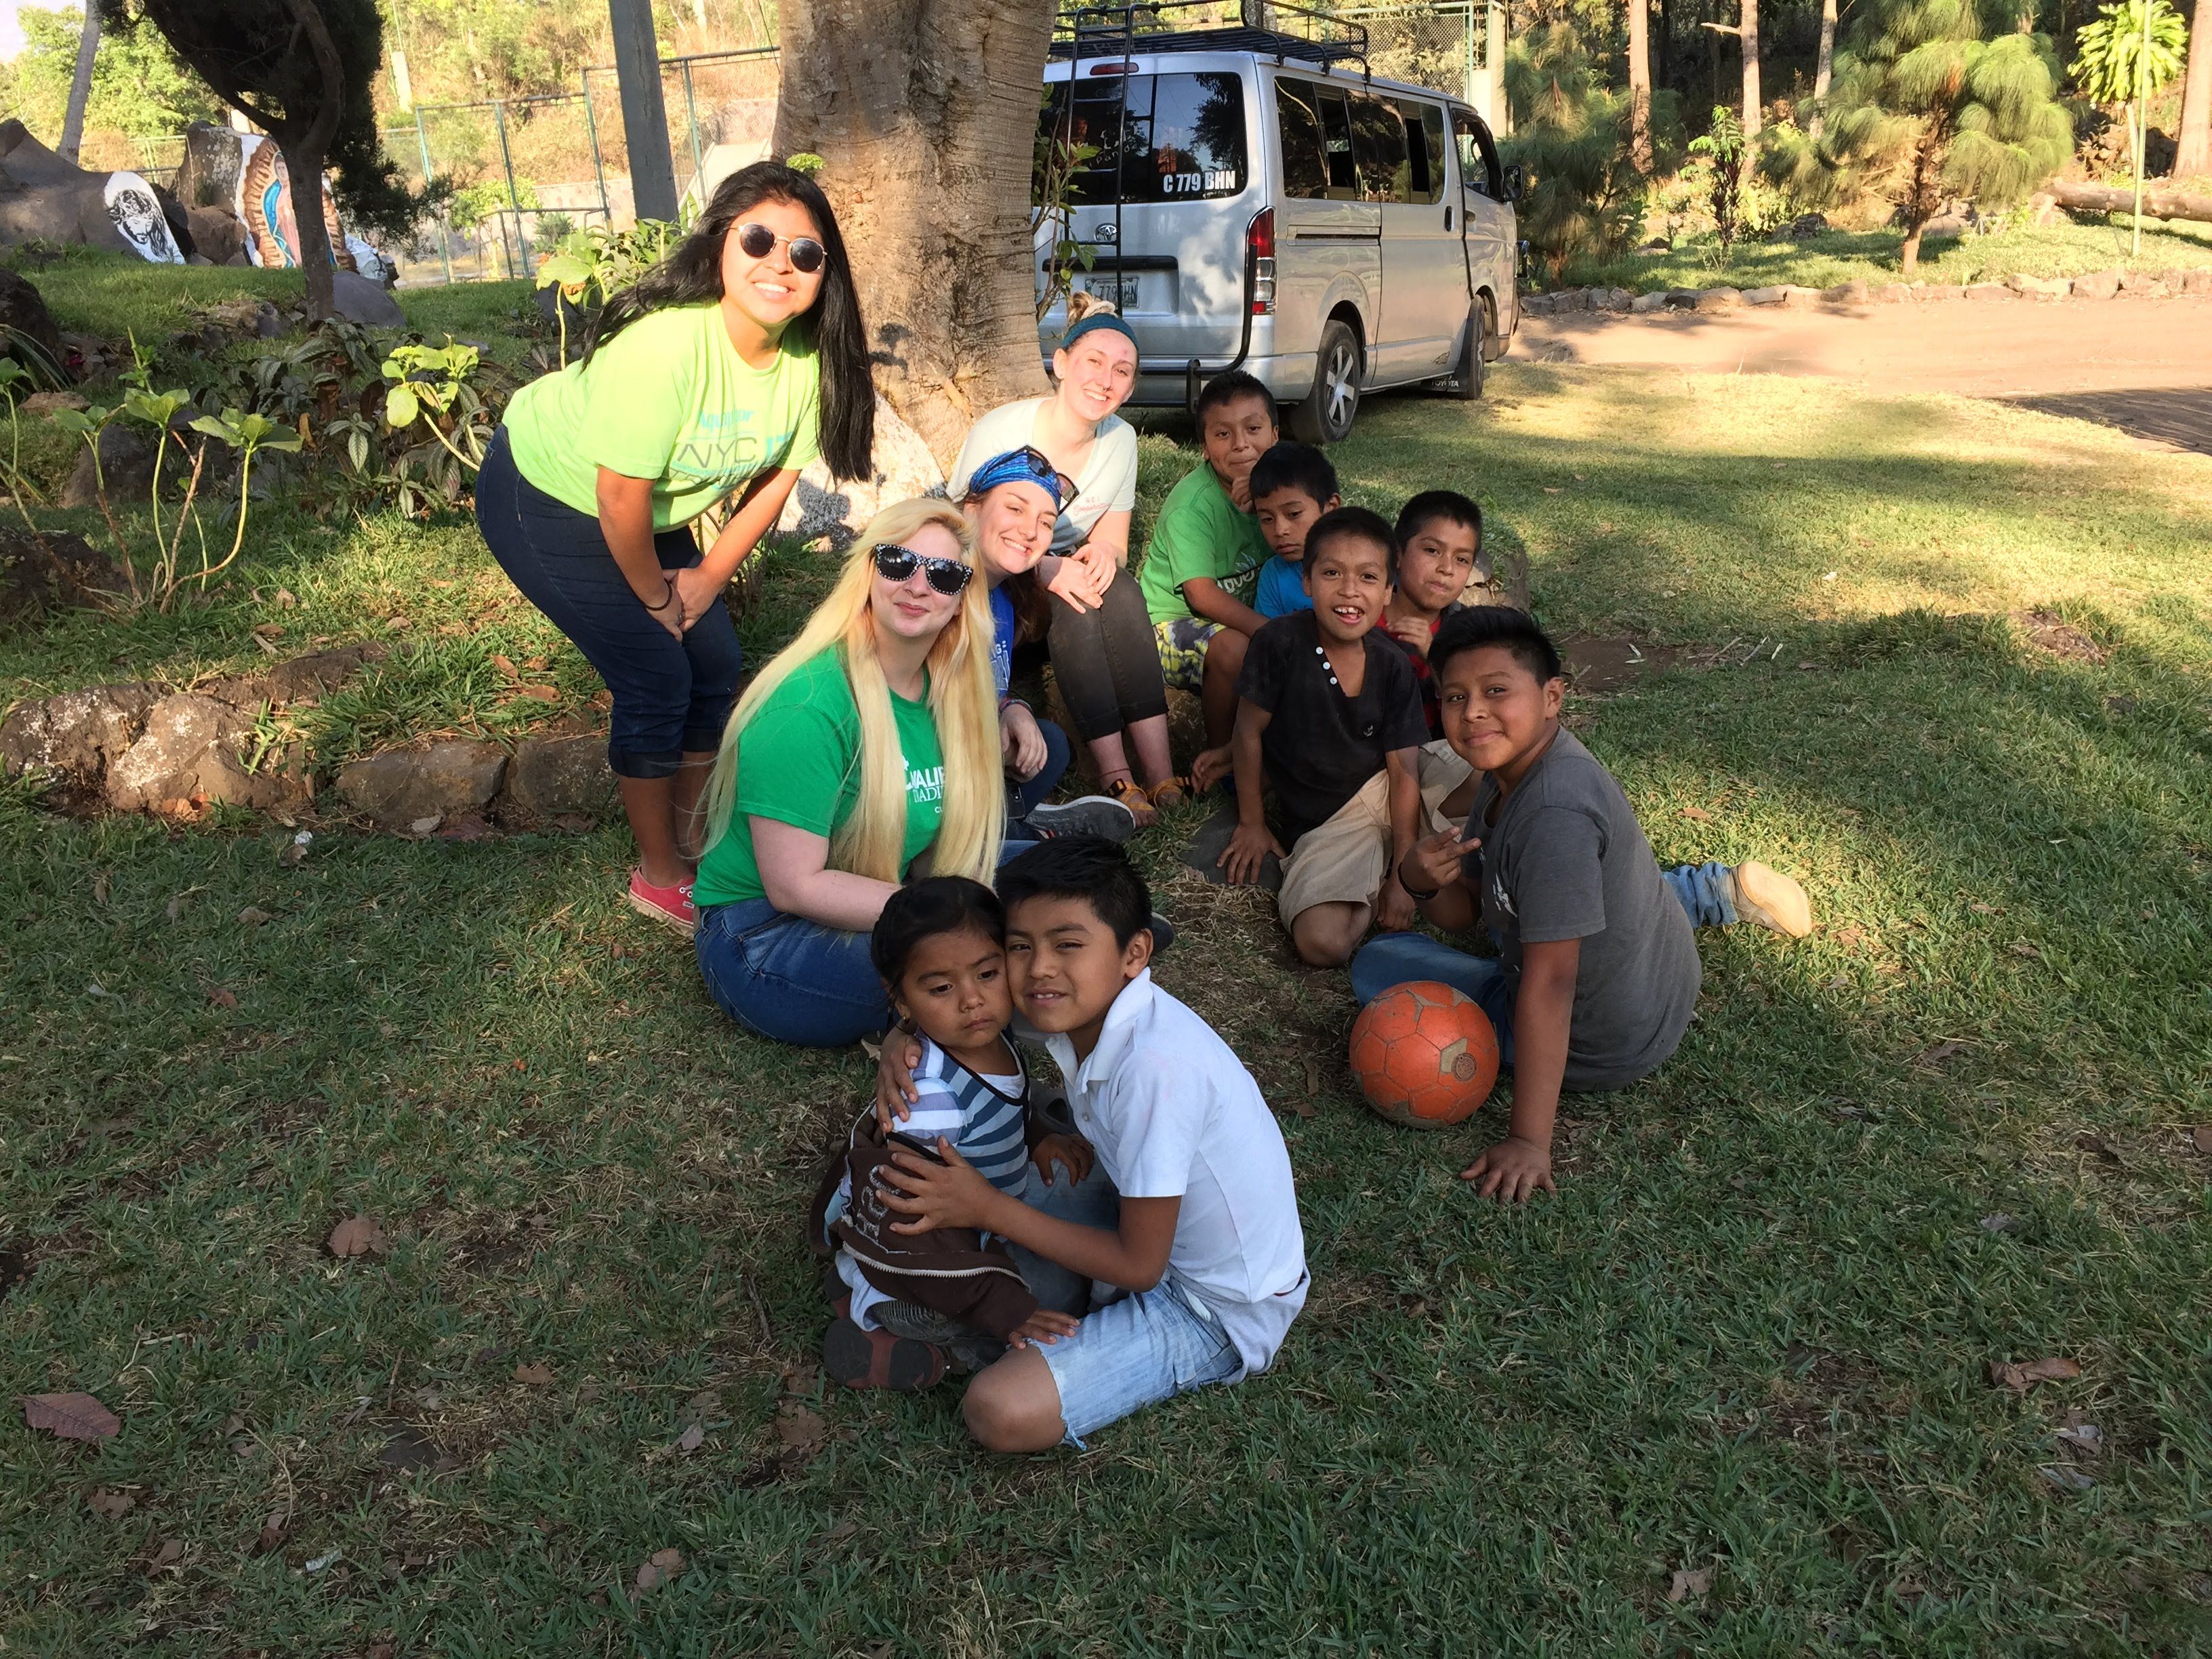 Cabrini students hang out with a group of Guatemalan youth. Photo by Raquel Green.